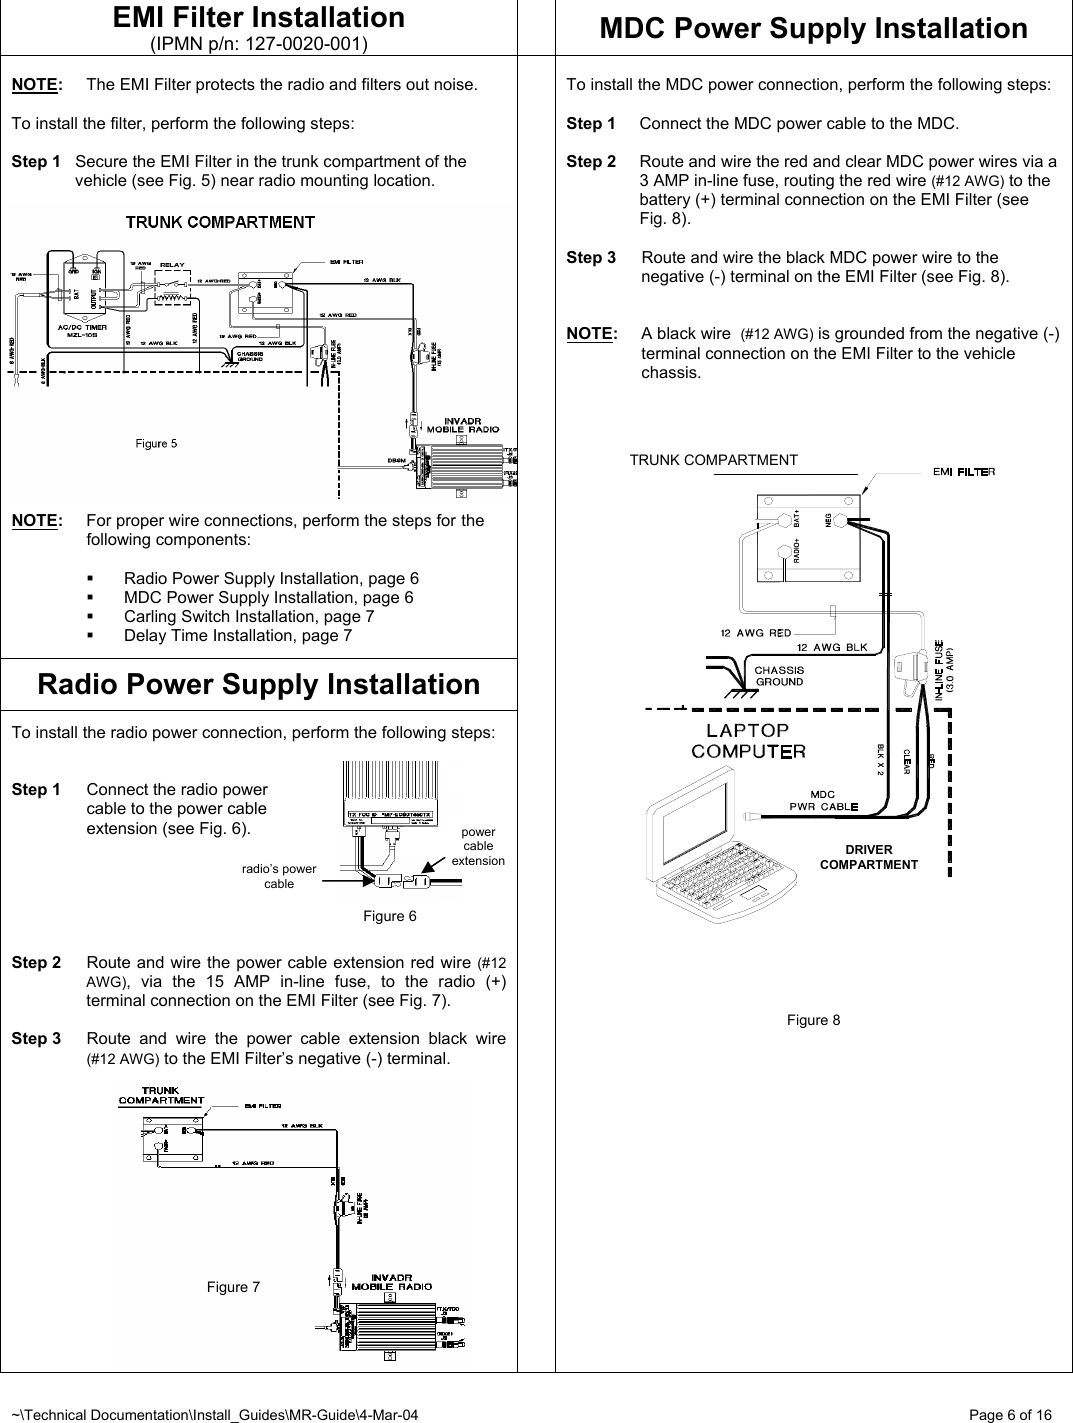 ~\Technical Documentation\Install_Guides\MR-Guide\4-Mar-04   Page 6 of 16 DRIVER COMPARTMENT TRUNK COMPARTMENT EMI Filter Installation (IPMN p/n: 127-0020-001)  MDC Power Supply Installation  NOTE:  The EMI Filter protects the radio and filters out noise.  To install the filter, perform the following steps:  Step 1  Secure the EMI Filter in the trunk compartment of the vehicle (see Fig. 5) near radio mounting location.   NOTE:  For proper wire connections, perform the steps for  the  following components:    Radio Power Supply Installation, page 6   MDC Power Supply Installation, page 6   Carling Switch Installation, page 7   Delay Time Installation, page 7  Radio Power Supply Installation  To install the radio power connection, perform the following steps:   Step 1  Connect the radio power   cable to the power cable    extension (see Fig. 6).       Step 2  Route and wire the power cable extension red wire (#12 AWG), via the 15 AMP in-line fuse, to the radio (+) terminal connection on the EMI Filter (see Fig. 7).  Step 3  Route and wire the power cable extension black wire (#12 AWG) to the EMI Filter’s negative (-) terminal.                                           Figure 7       To install the MDC power connection, perform the following steps:  Step 1  Connect the MDC power cable to the MDC.  Step 2  Route and wire the red and clear MDC power wires via a 3 AMP in-line fuse, routing the red wire (#12 AWG) to the battery (+) terminal connection on the EMI Filter (see Fig. 8).  Step 3  Route and wire the black MDC power wire to the negative (-) terminal on the EMI Filter (see Fig. 8).   NOTE:  A black wire  (#12 AWG) is grounded from the negative (-) terminal connection on the EMI Filter to the vehicle chassis.                                   Figure 8           radio’s power cable power cable extensionFigure 6 